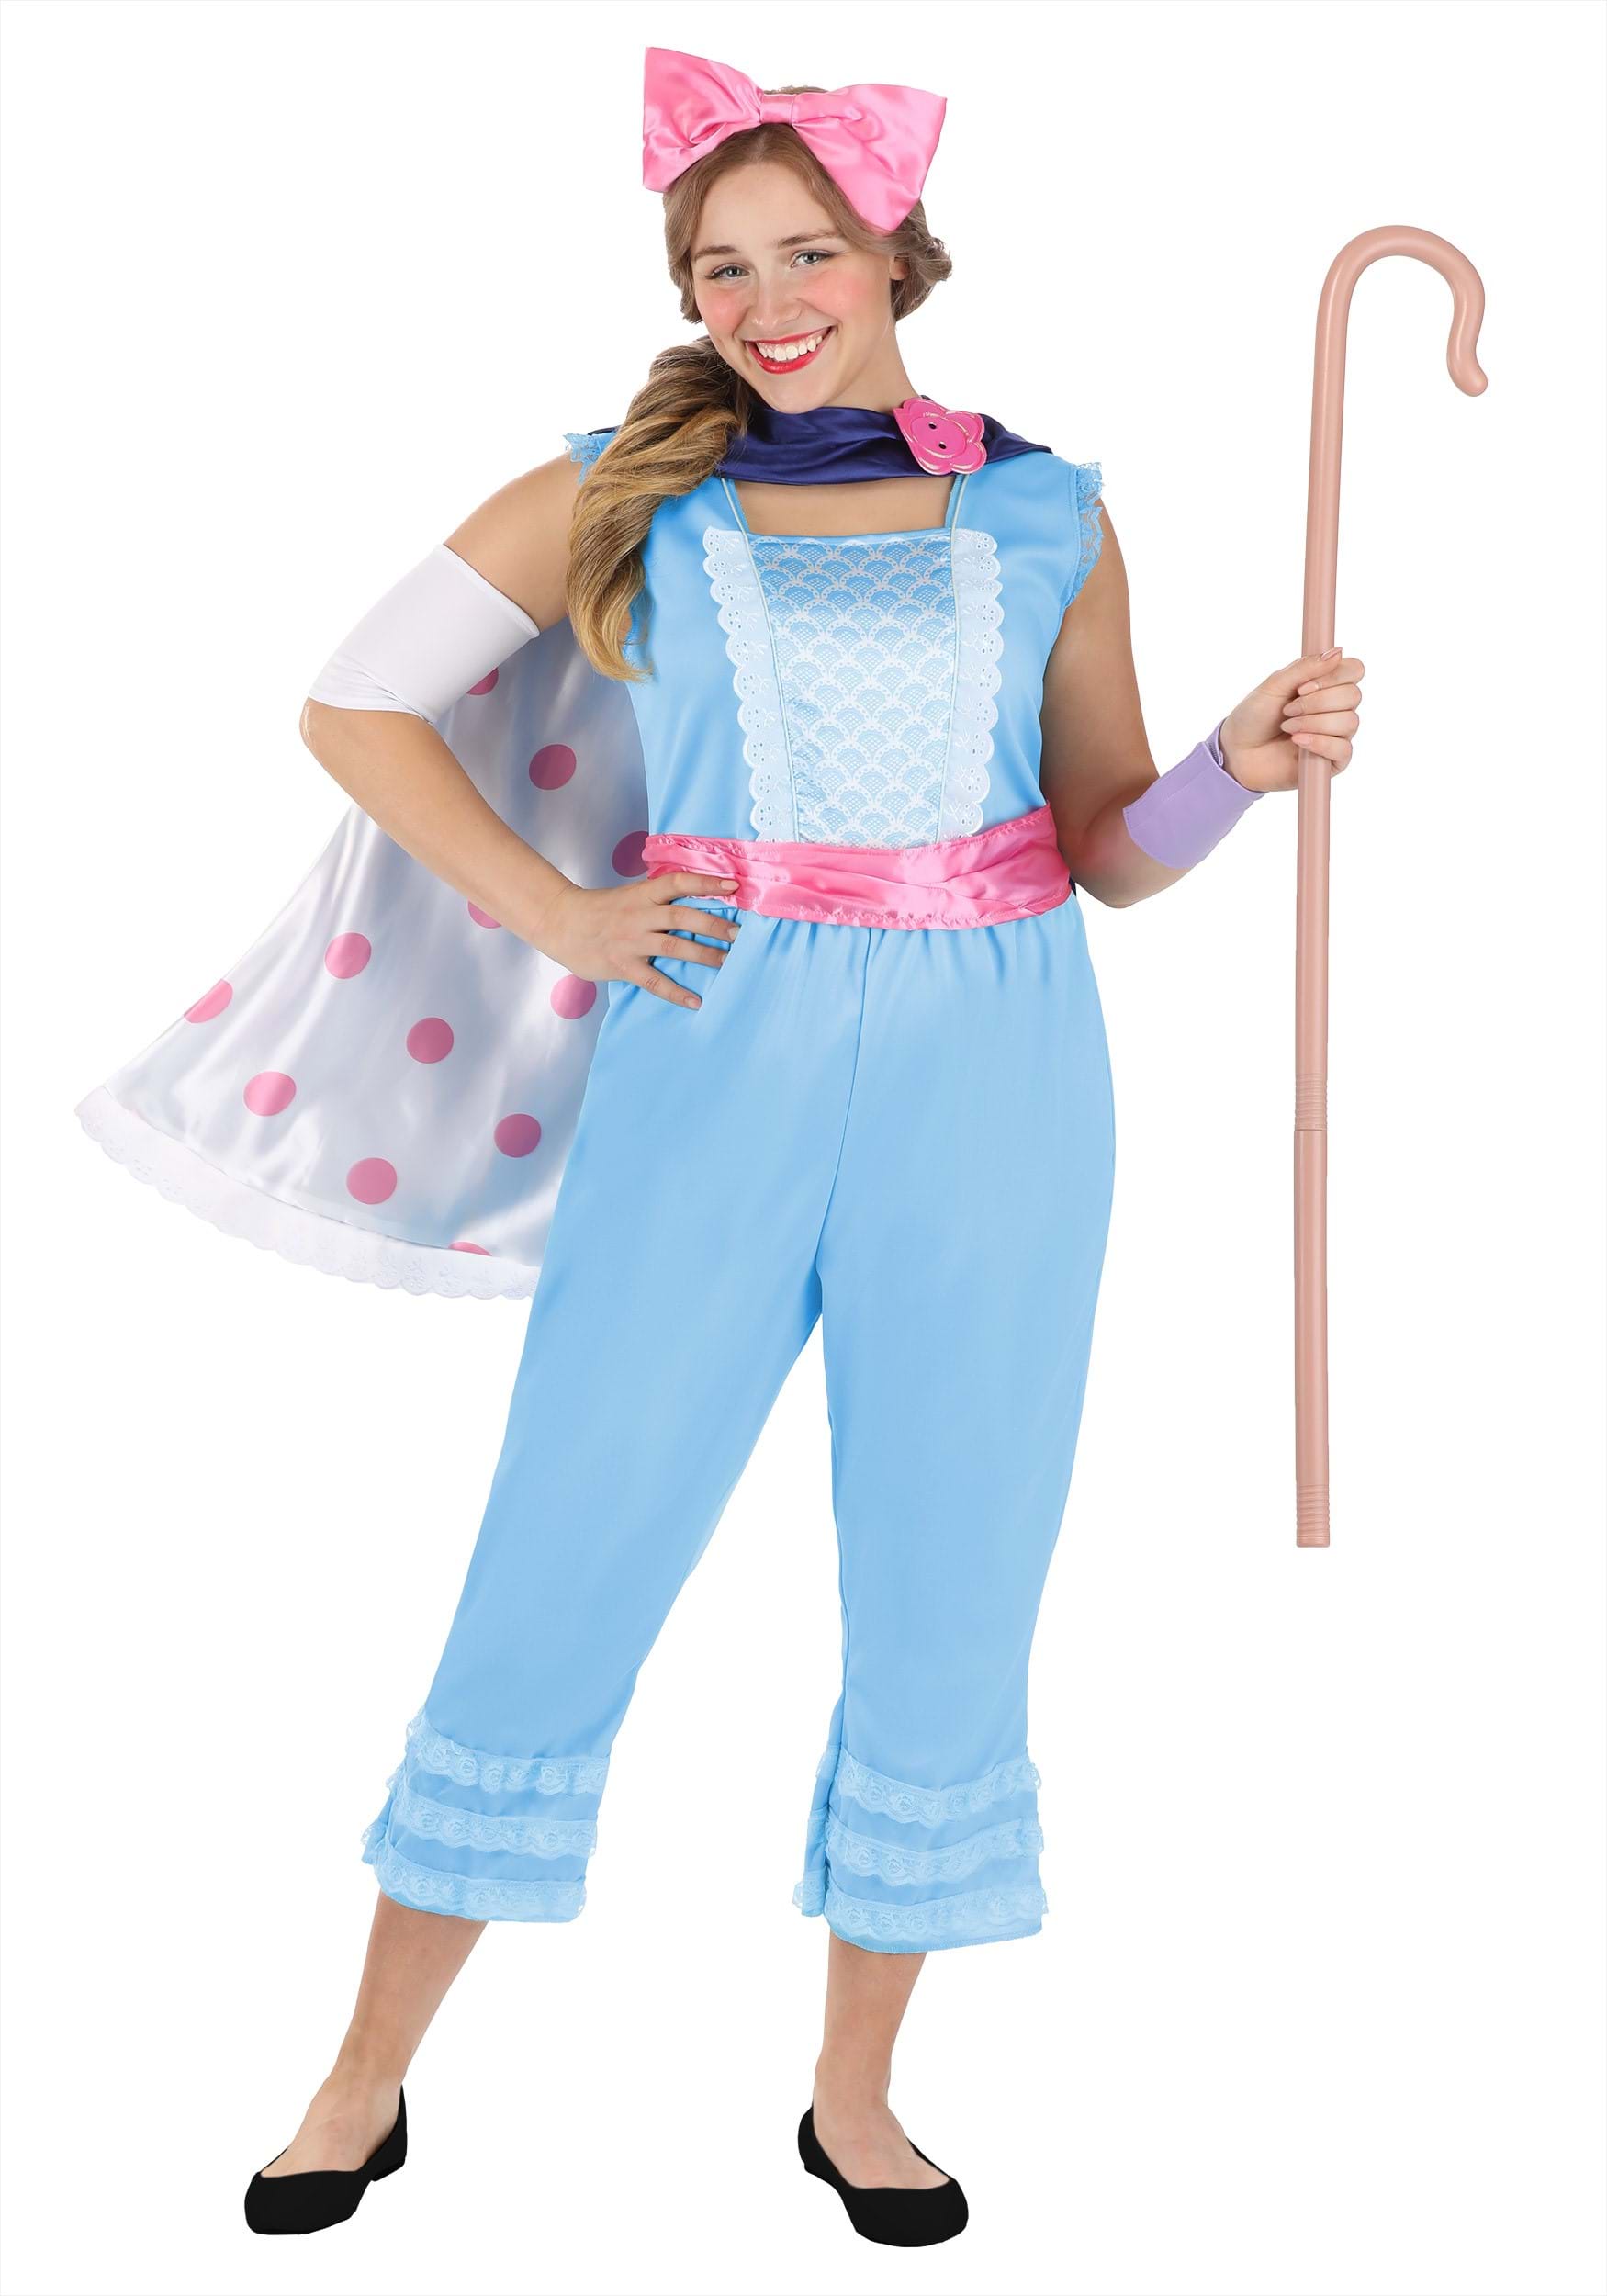 clarissa alexander share pictures of bo peep from toy story photos